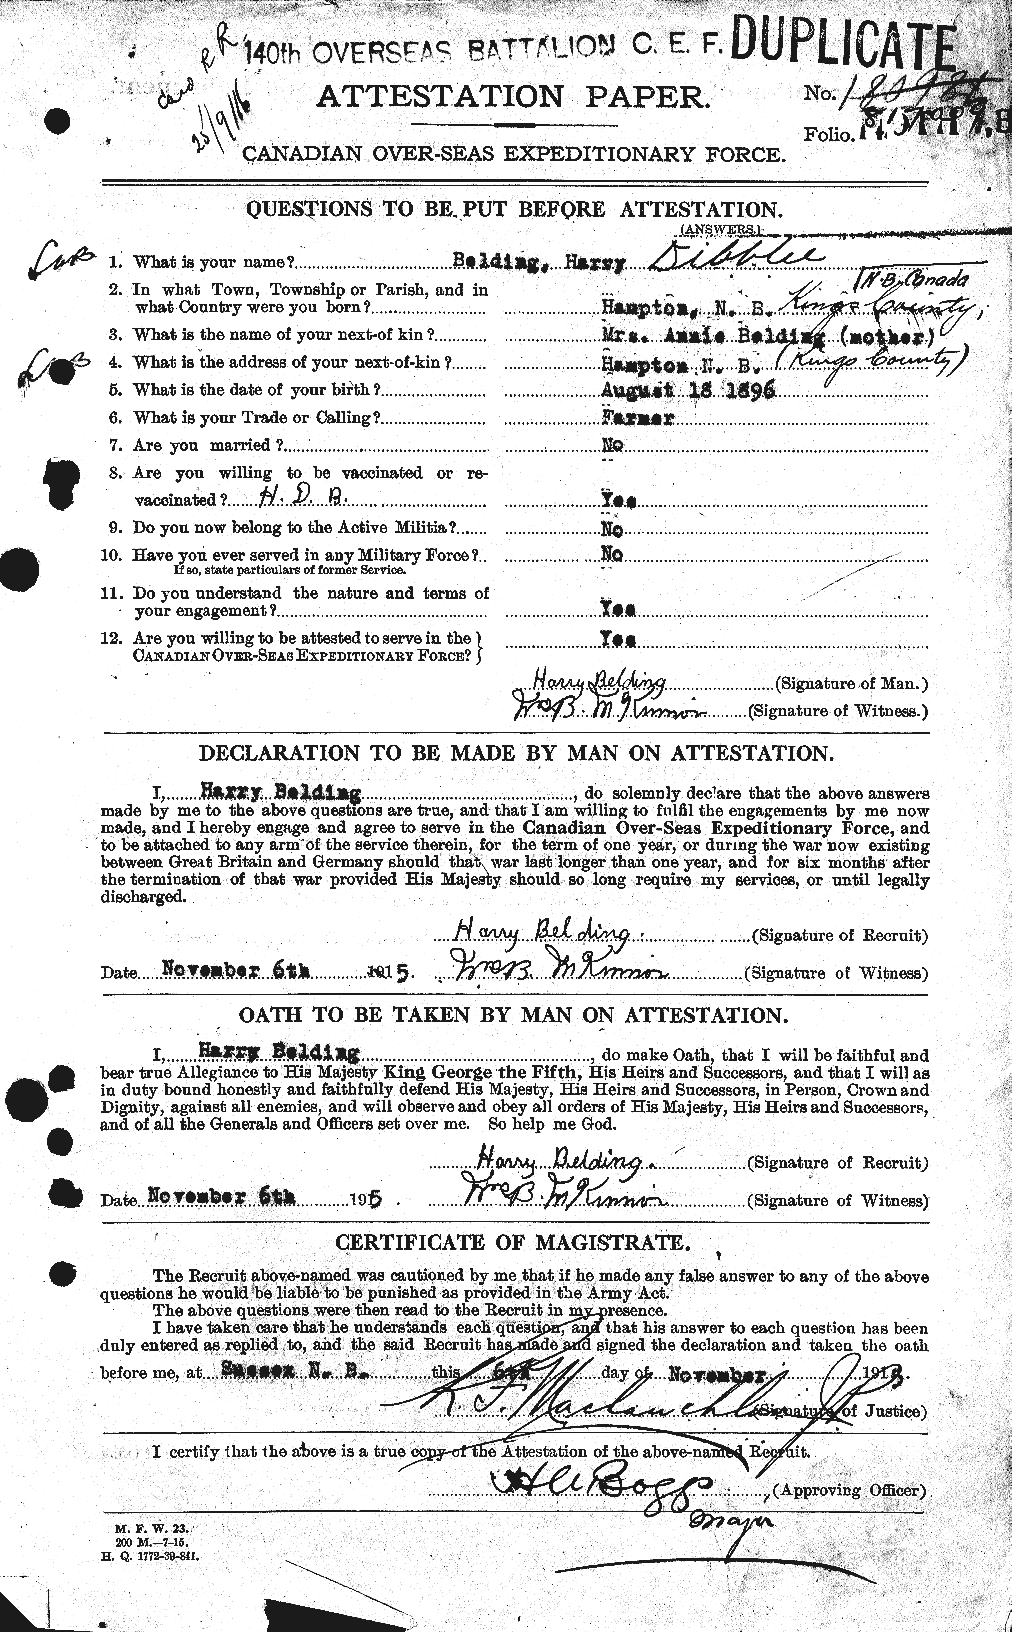 Personnel Records of the First World War - CEF 232512a